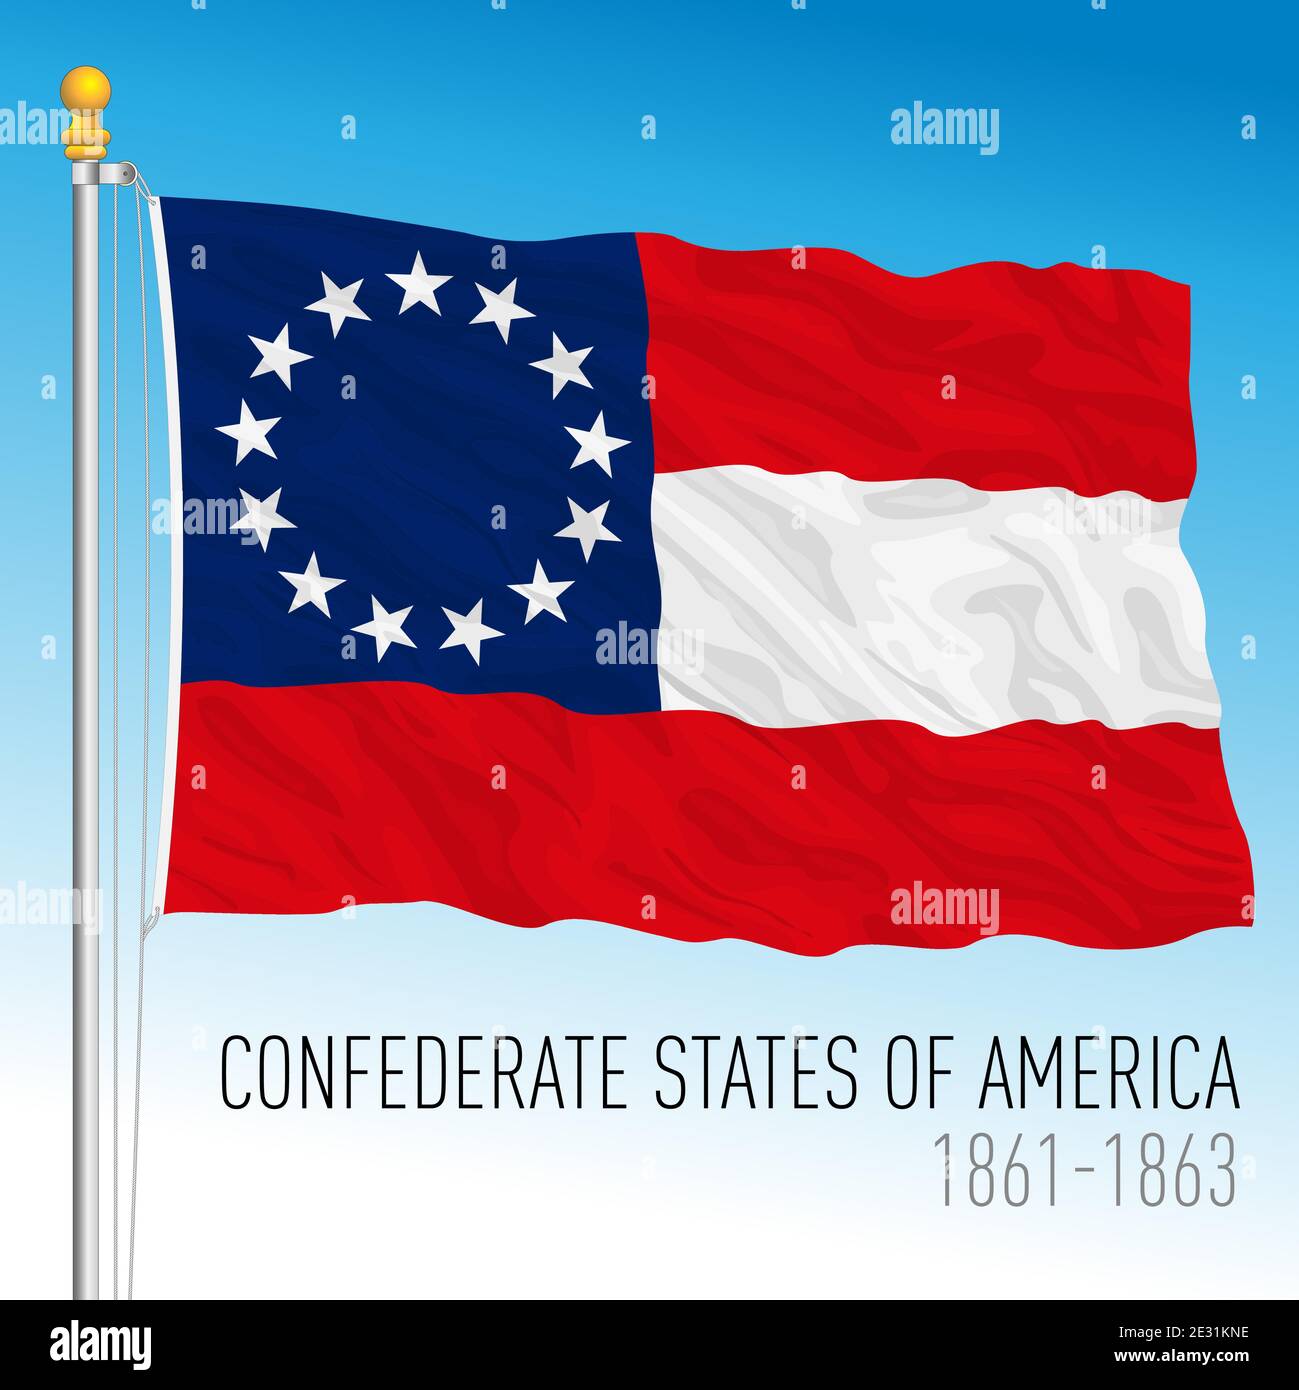 Confederate states historical flag, 1861 - 1863, United States, vector illustration Stock Vector